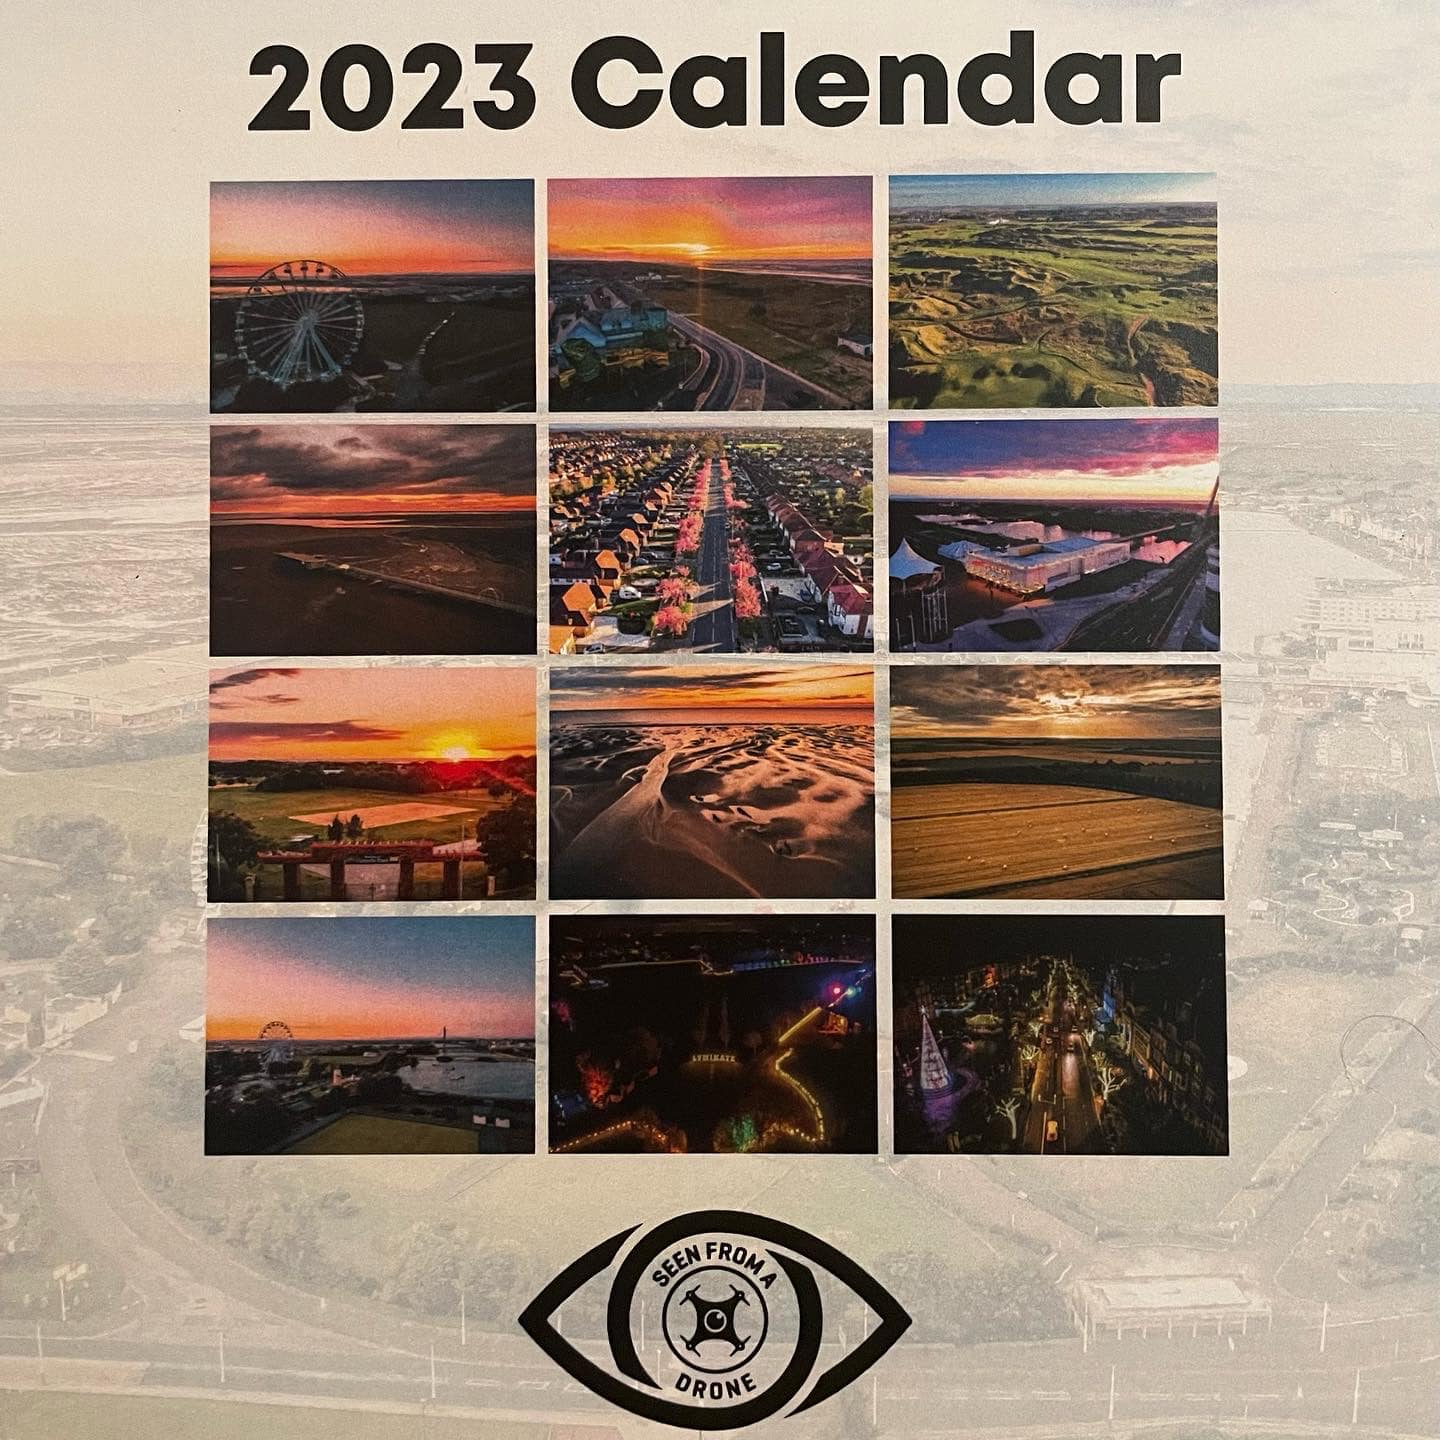 The 2023 Calendar by Seen From A Drone is now on sale, featuring iconic aerial scenes of Southpor